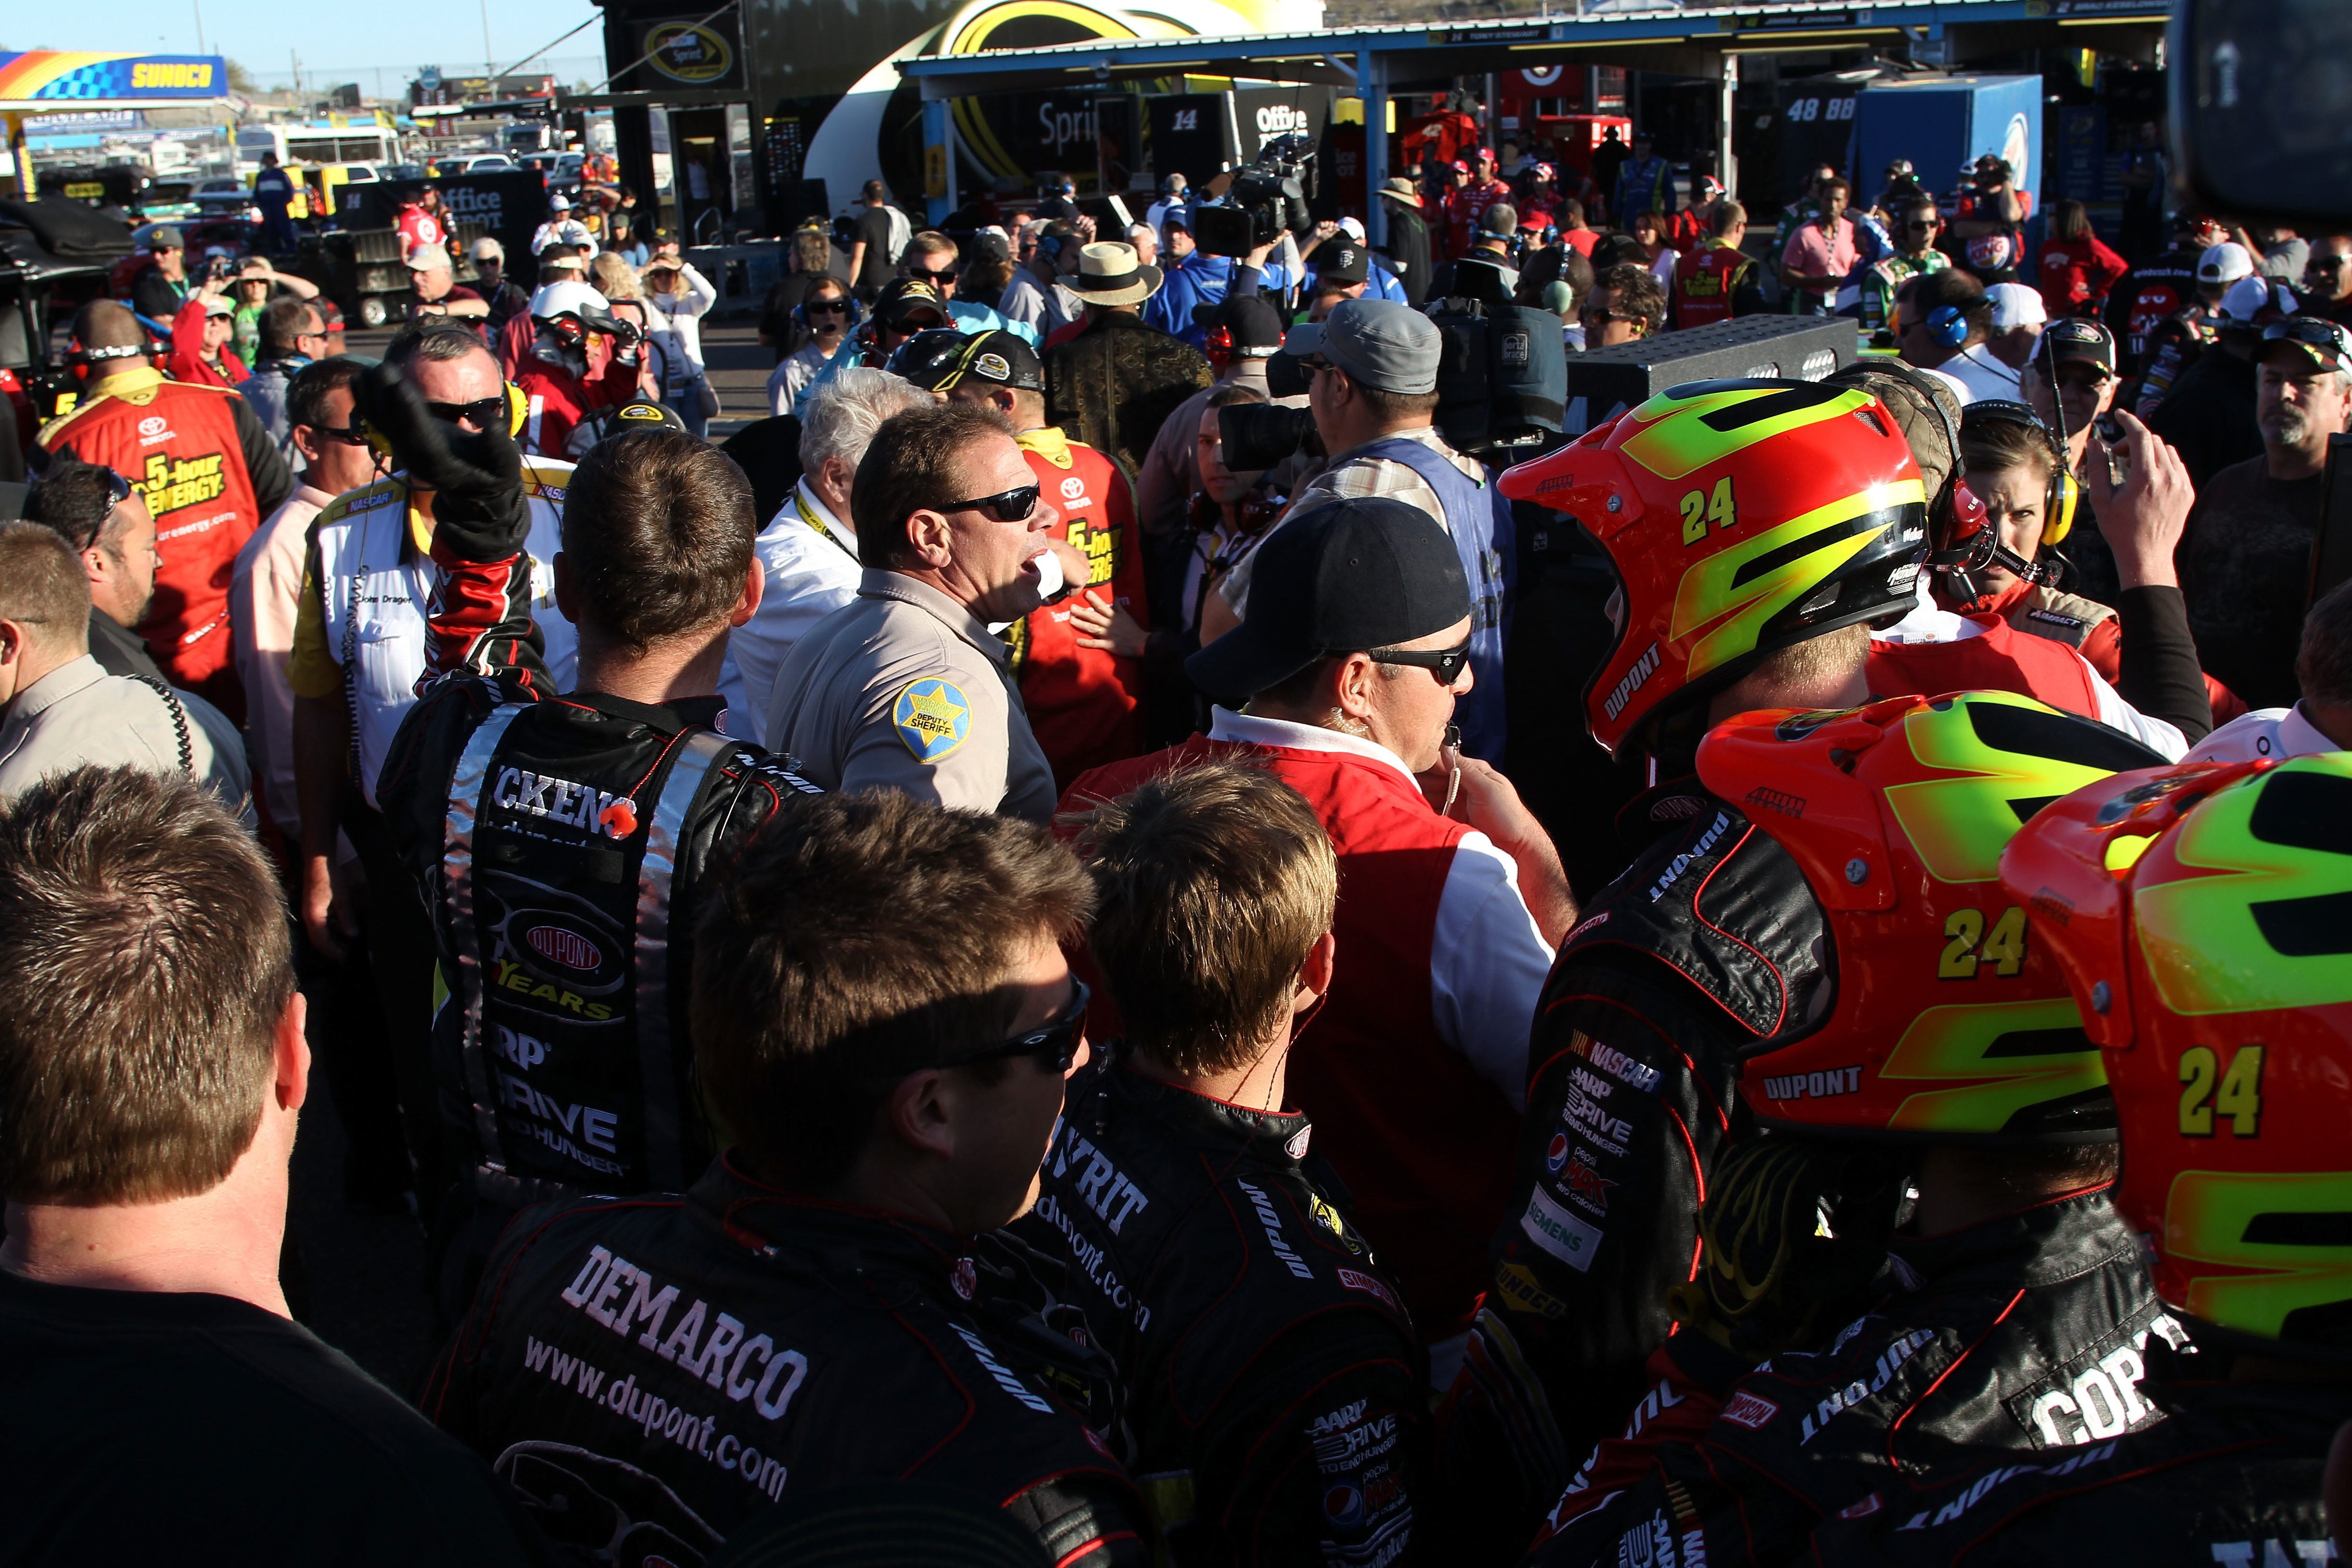 Not even NASCAR officials could break up the chaos in the garage between the No. 15 and No. 24 teams.  The Arizona police force had to get involved.